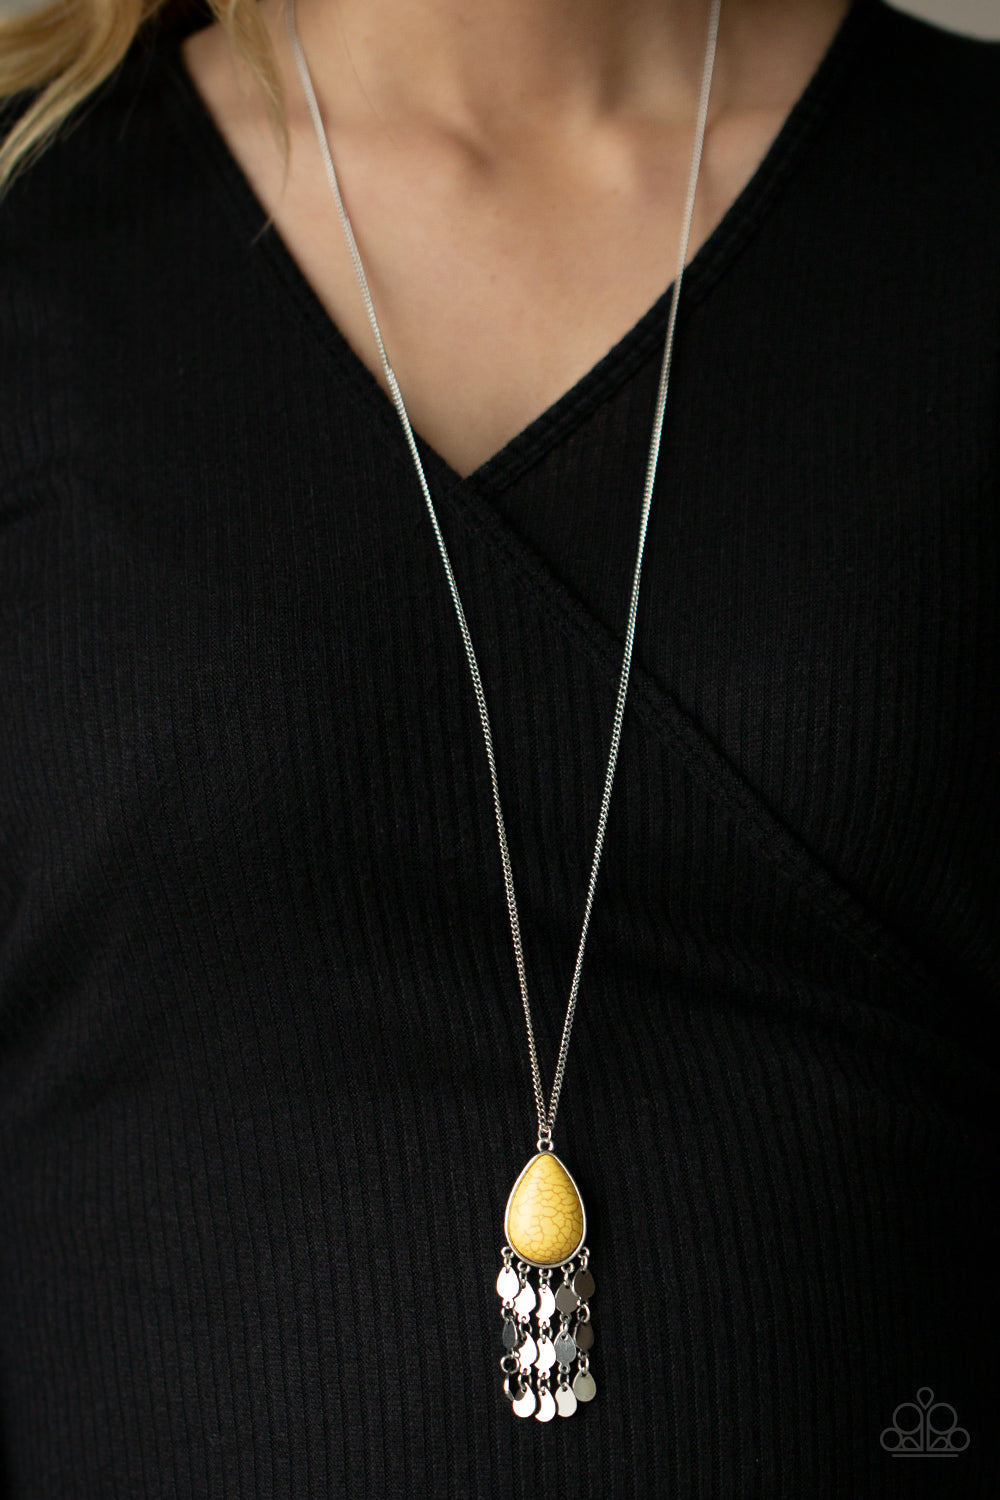 PRE-ORDER - Paparazzi Musically Mojave - Yellow - Necklace & Earrings - $5 Jewelry with Ashley Swint